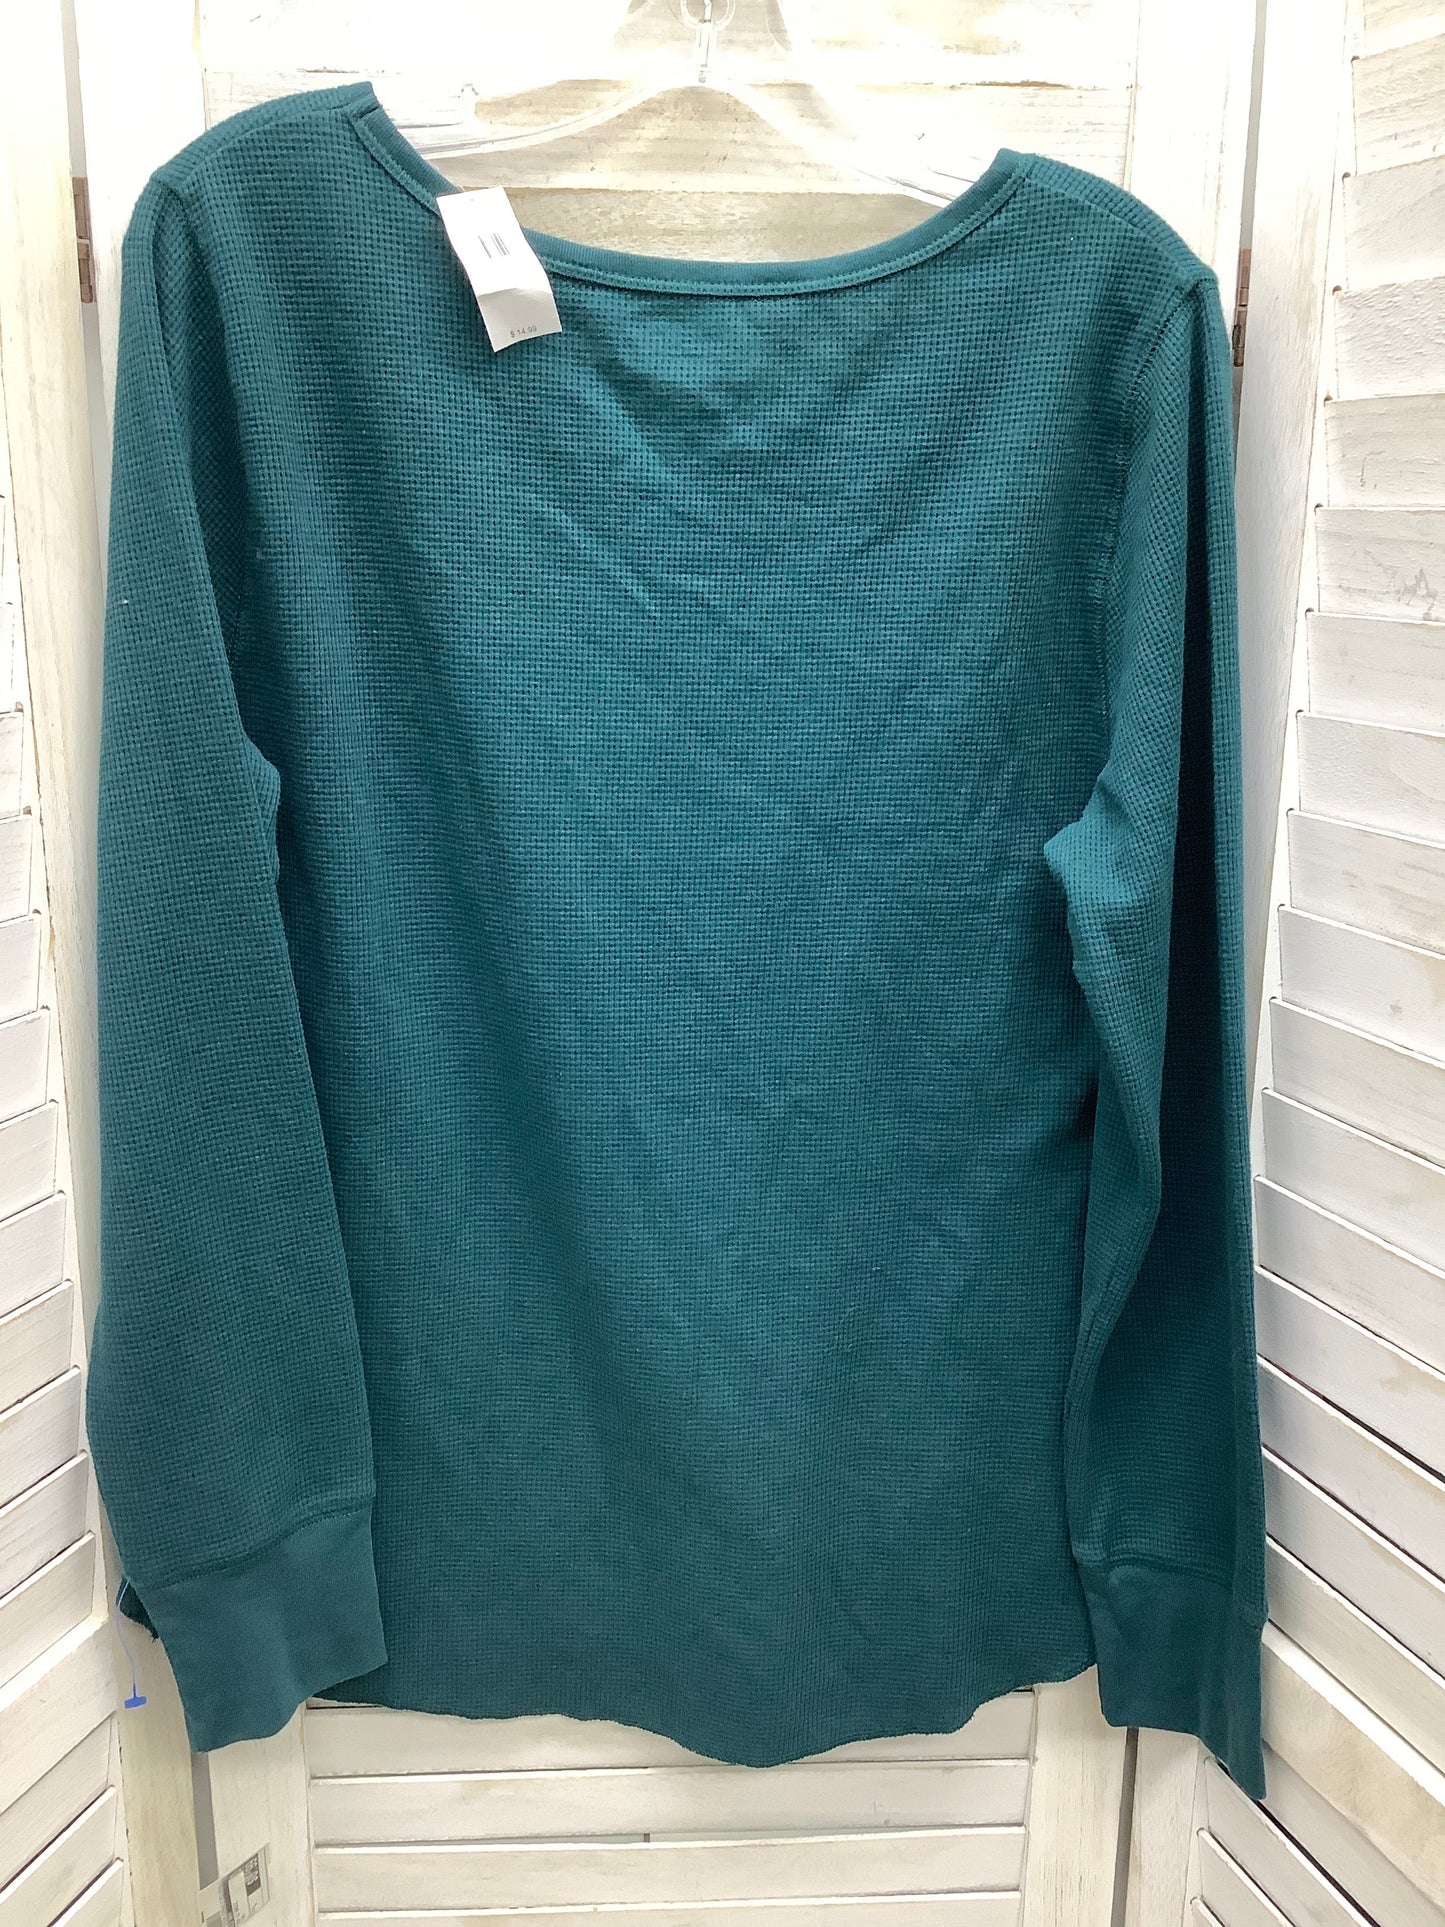 Teal Top Long Sleeve Basic Old Navy, Size L